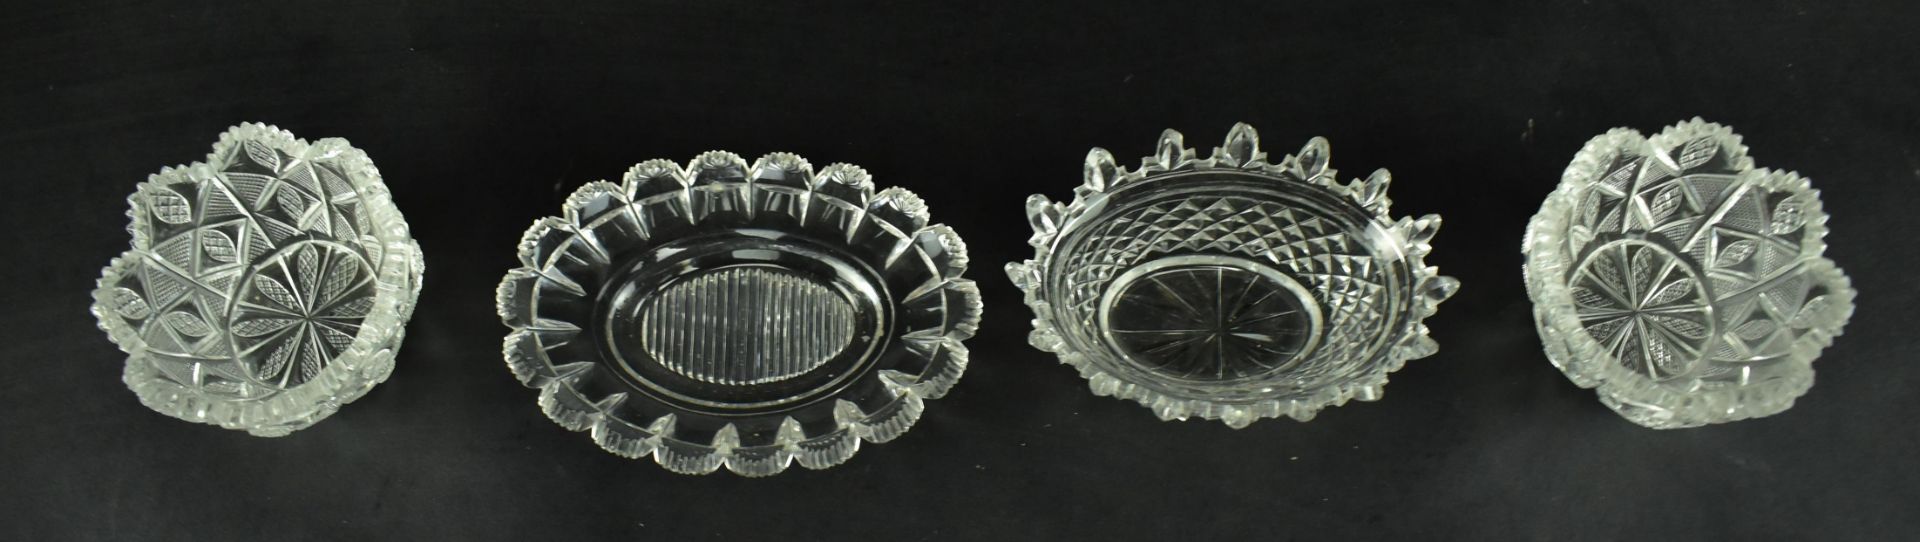 COLLECTION OF EARLY 19TH CENTURY CUT GLASS TABLEWARE - Image 2 of 7